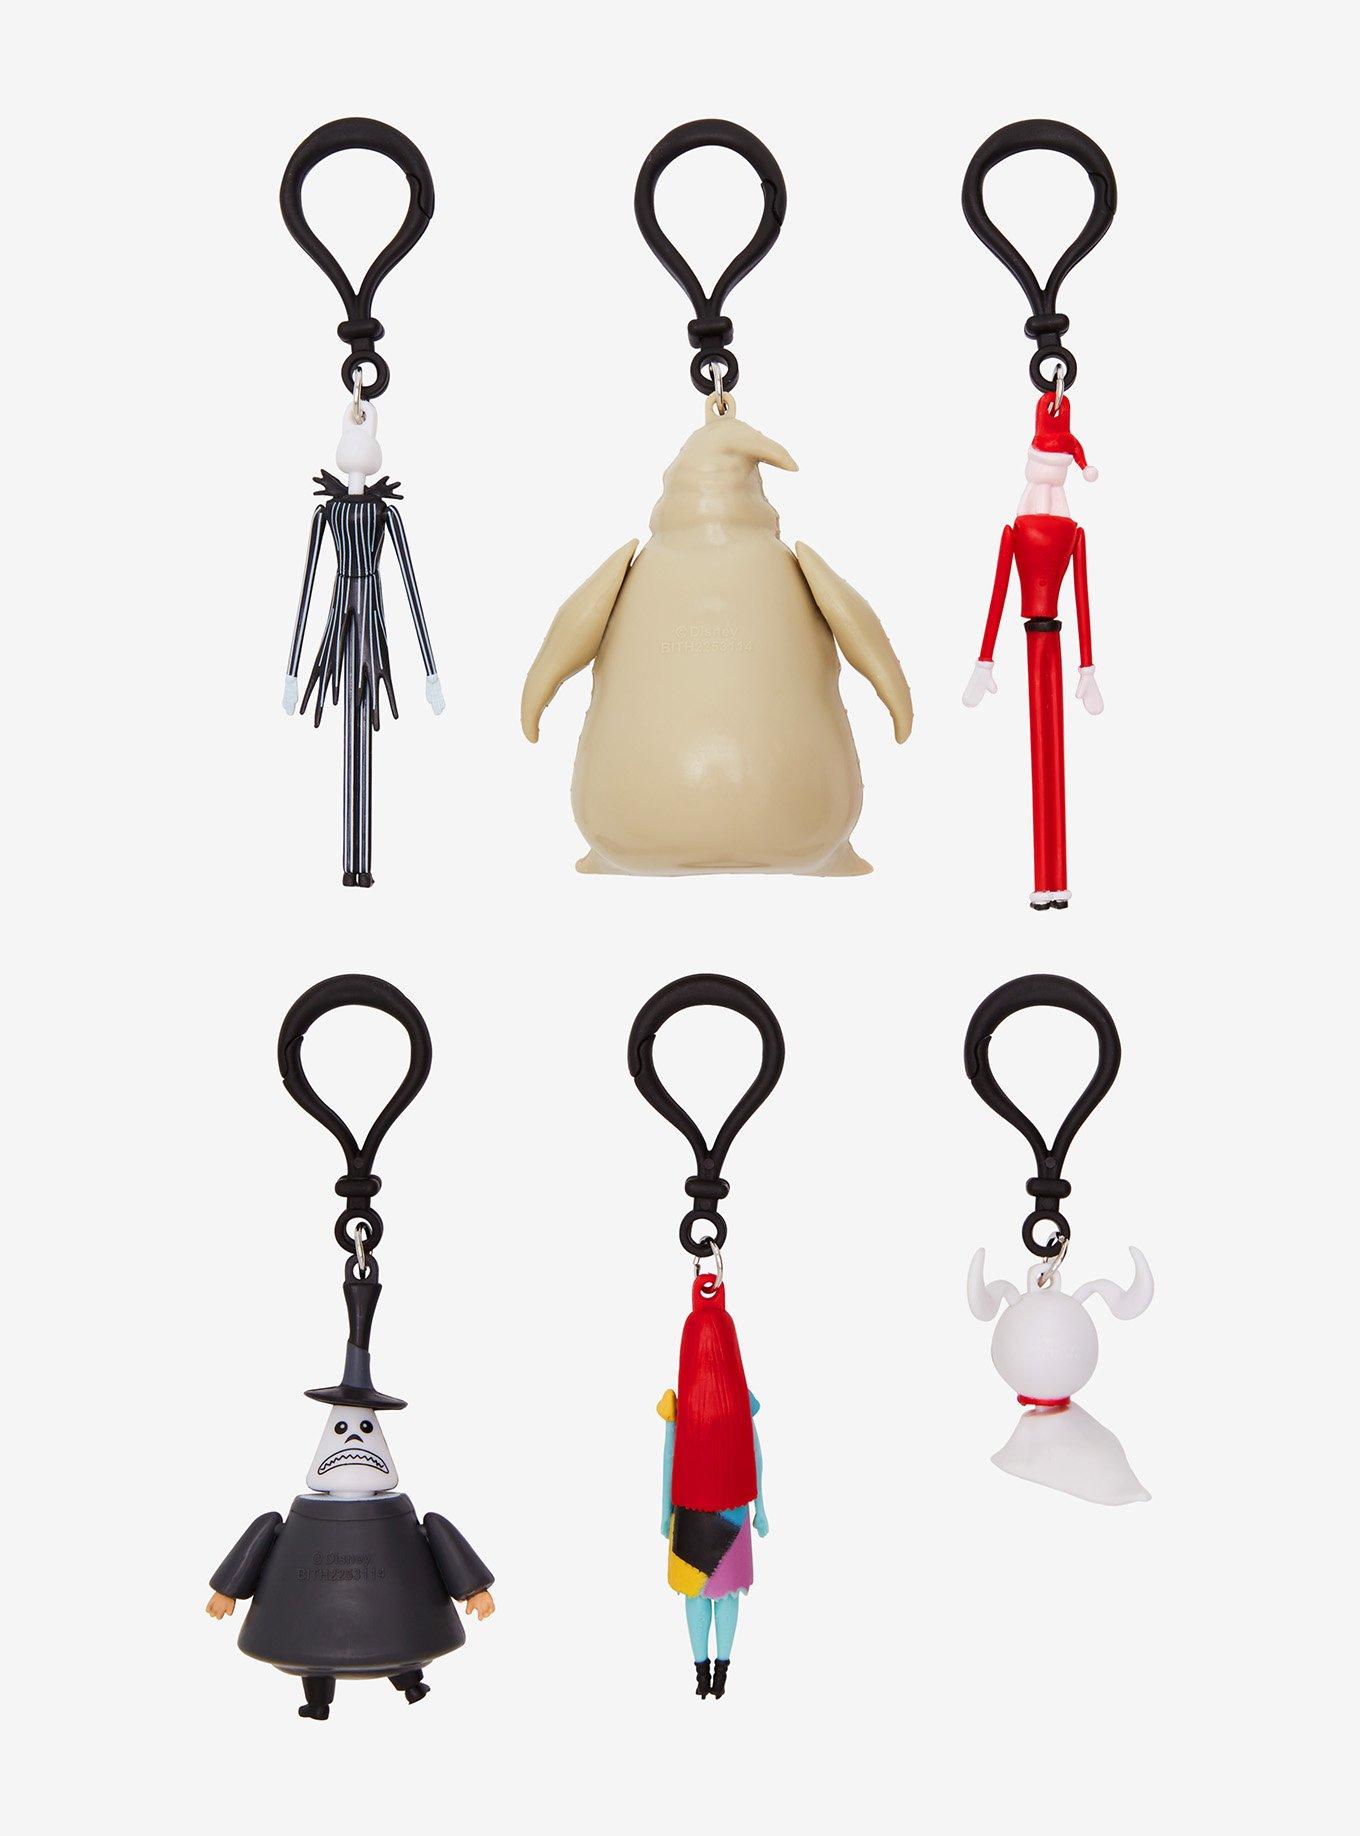 The Nightmare Before Christmas Chibi In Motion Blind Box Figural Key Chain